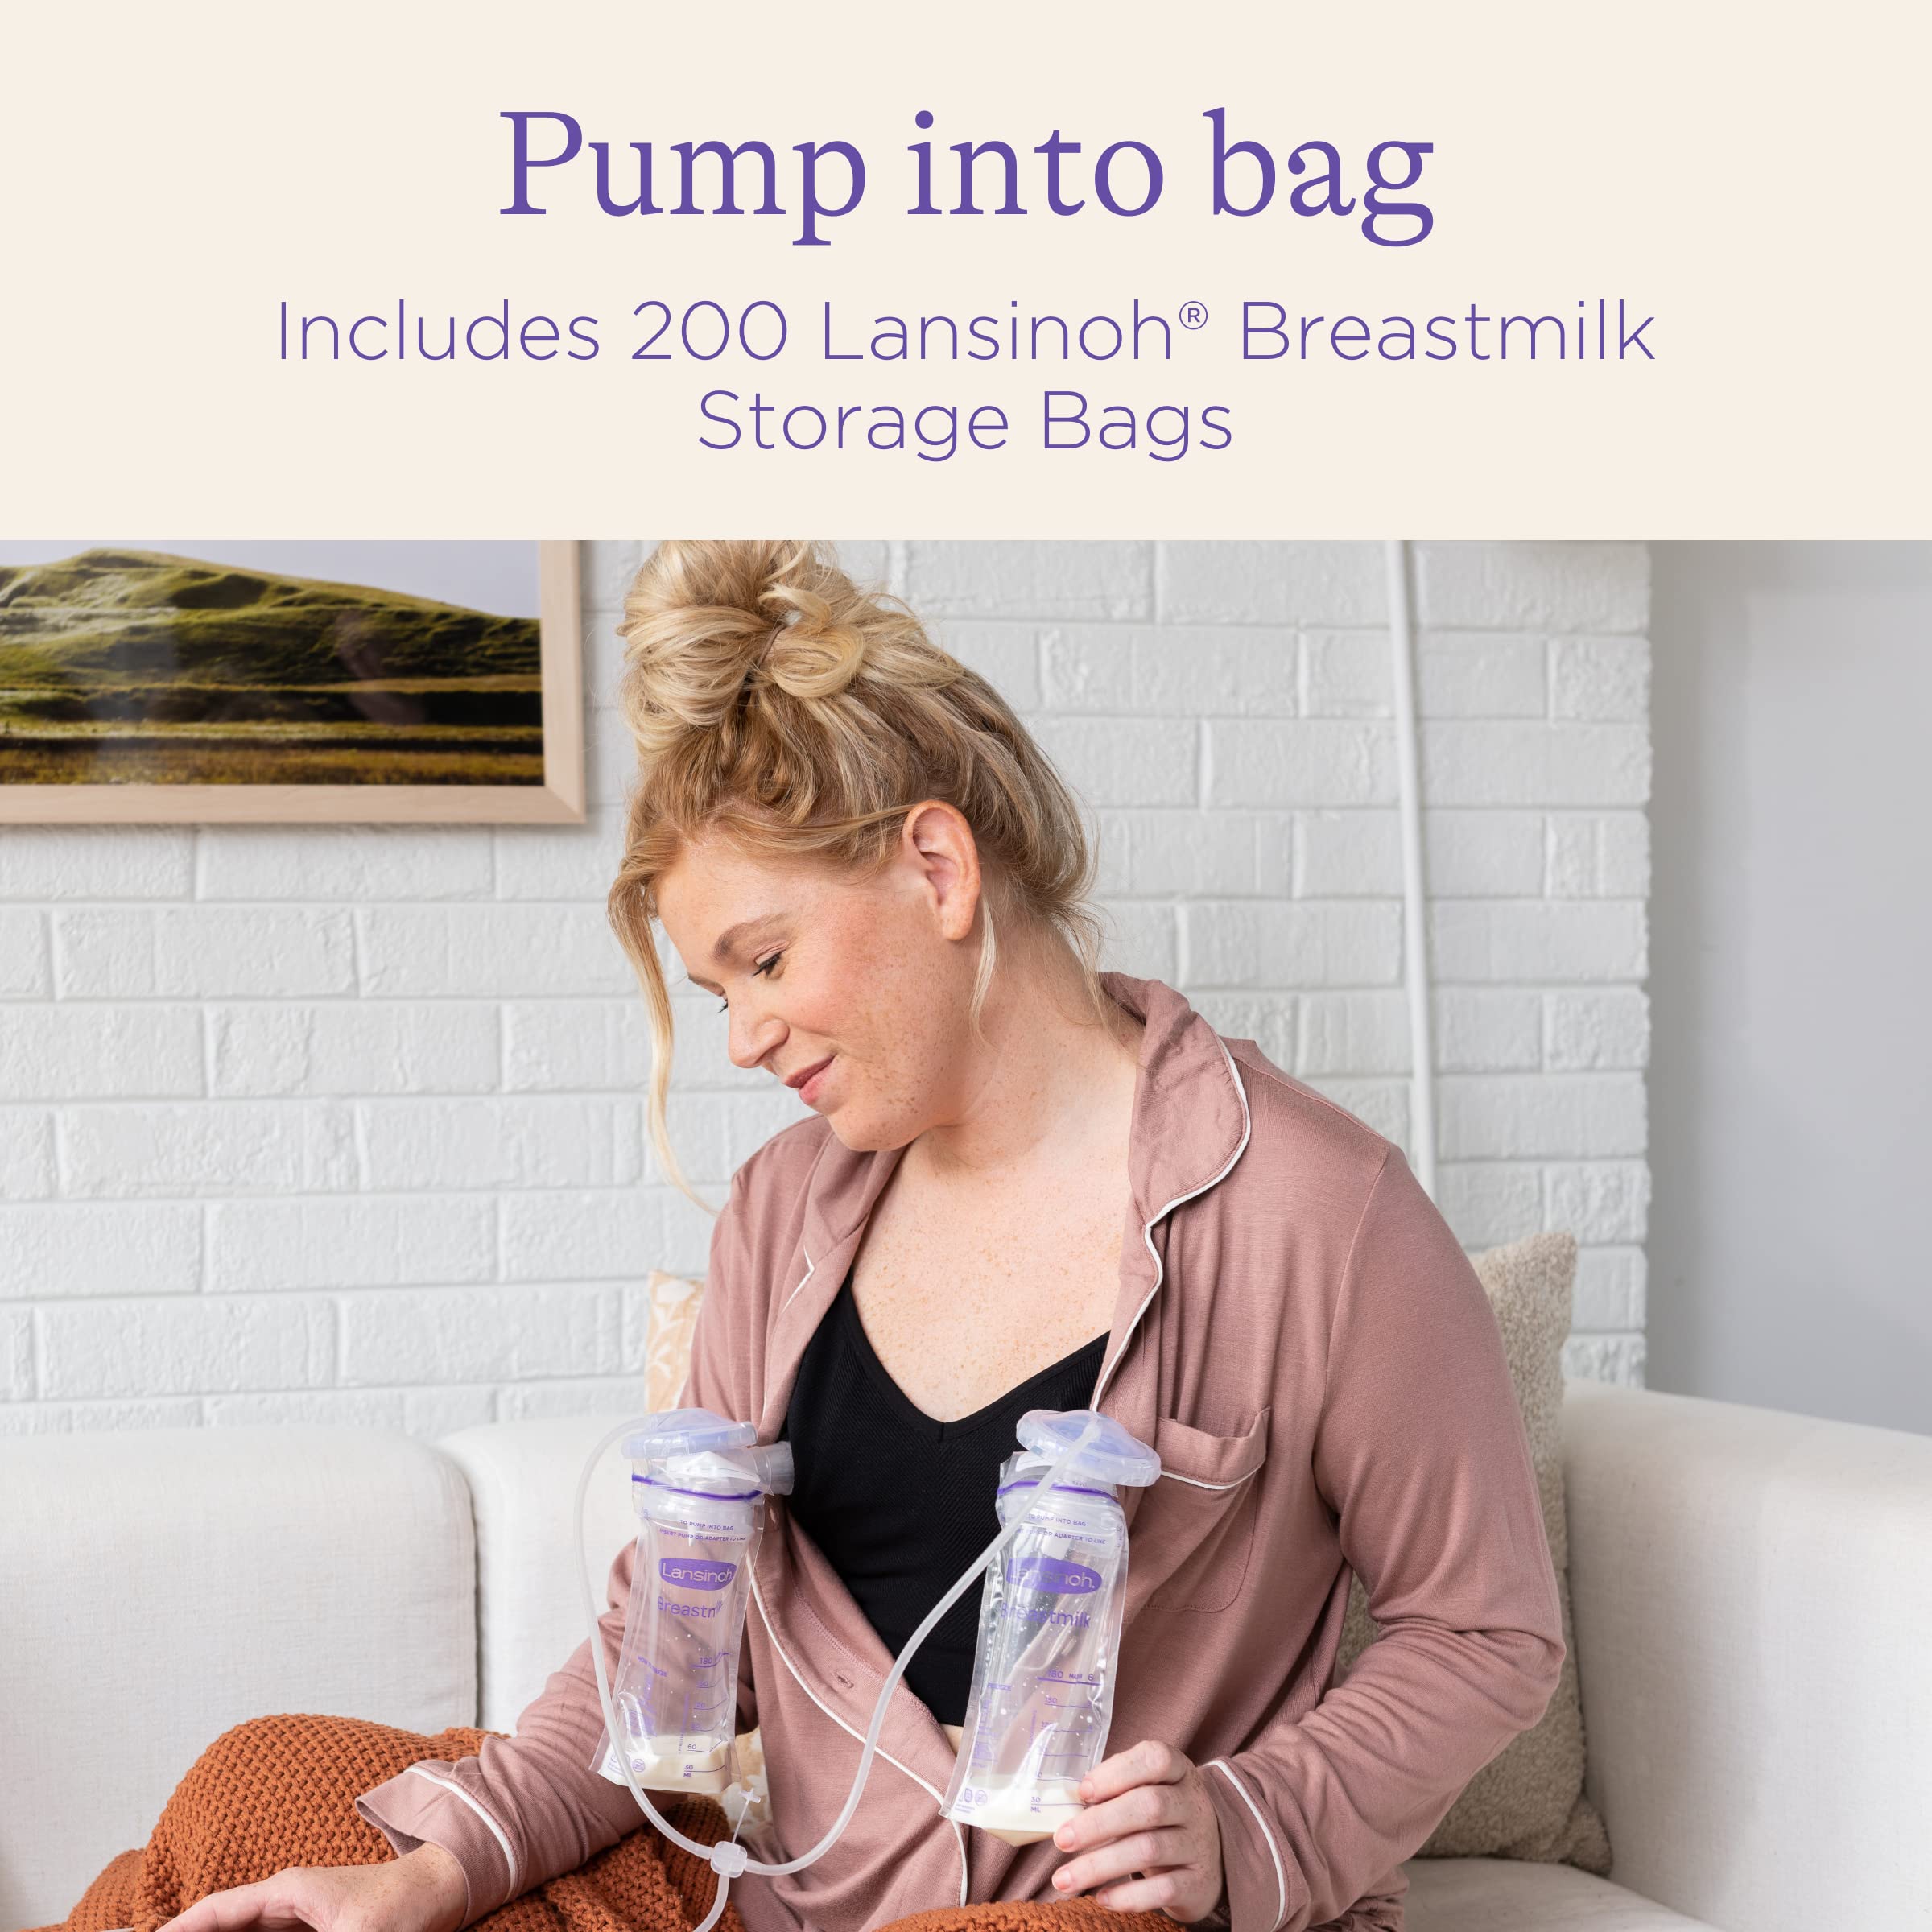 Lansinoh Signature Pro Double Electric Breast Pump with 200 Lansinoh Breastmilk Storage Bags